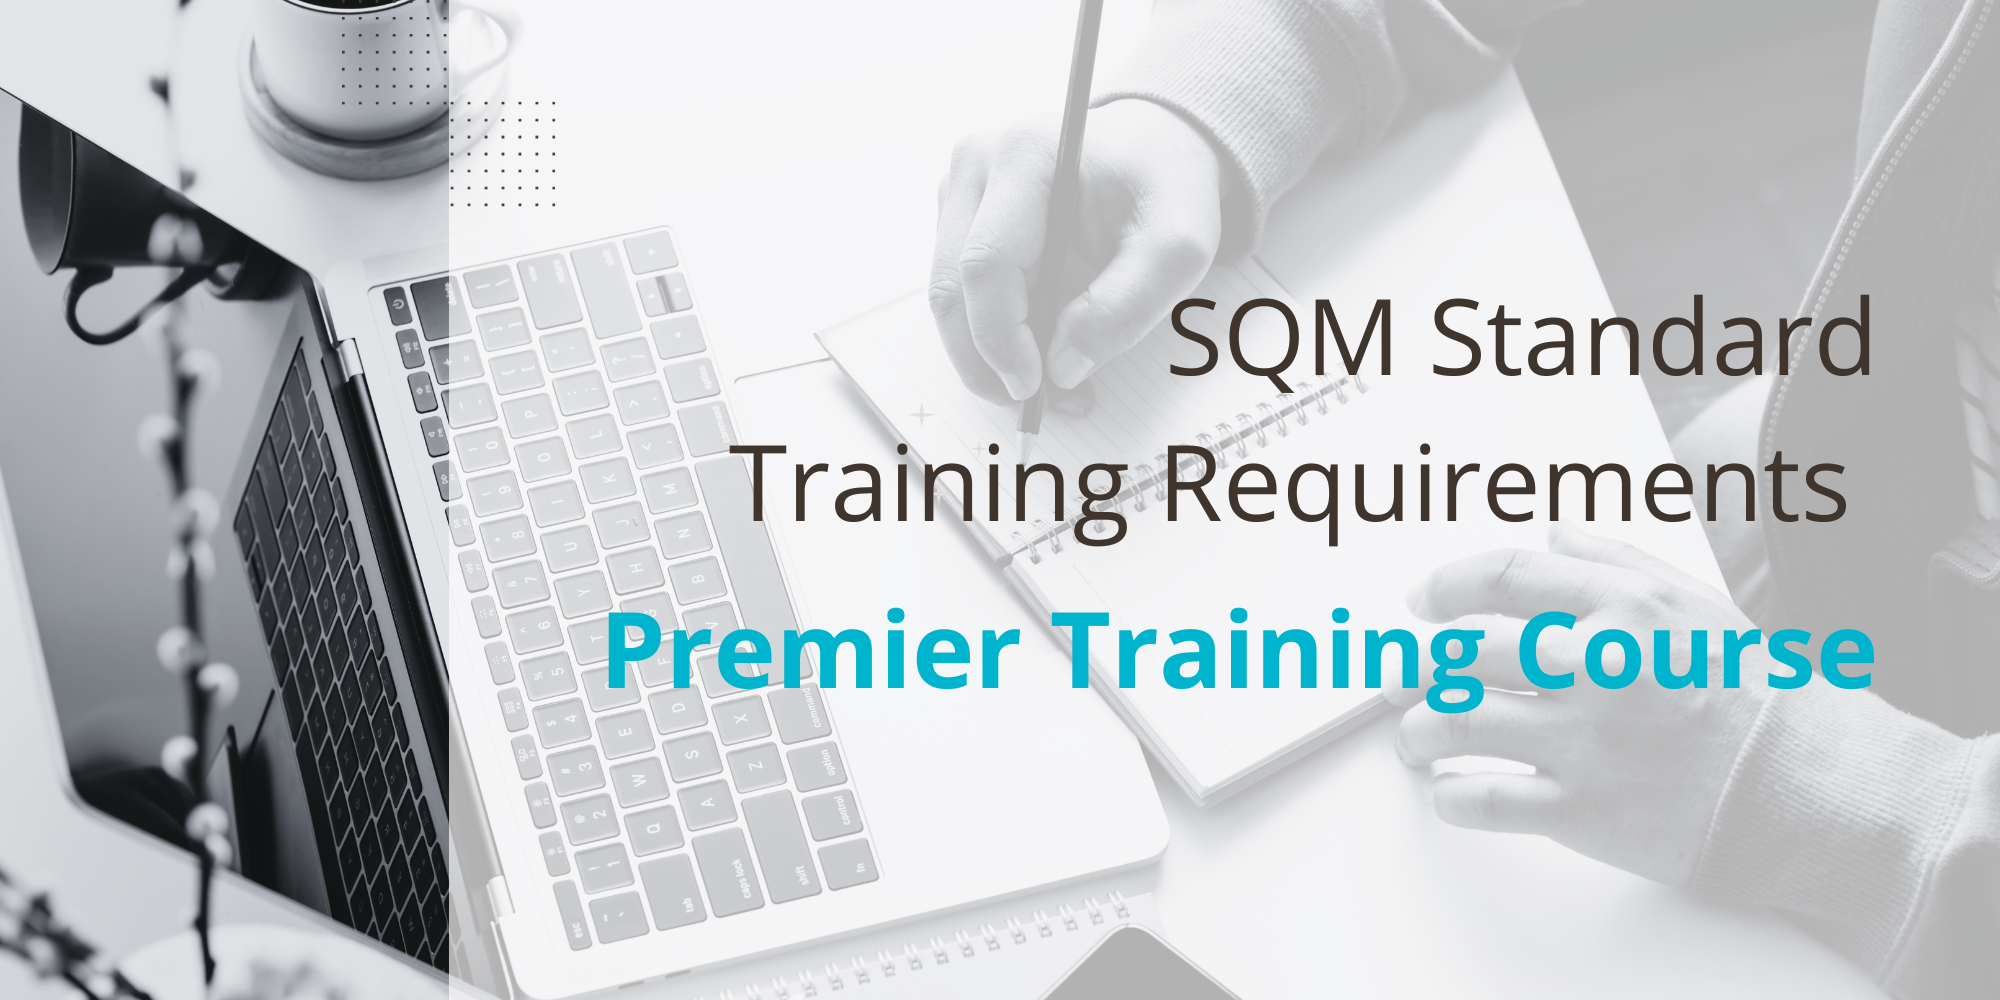 Specialist Quality Mark (SQM) Standard Training Requirements Course